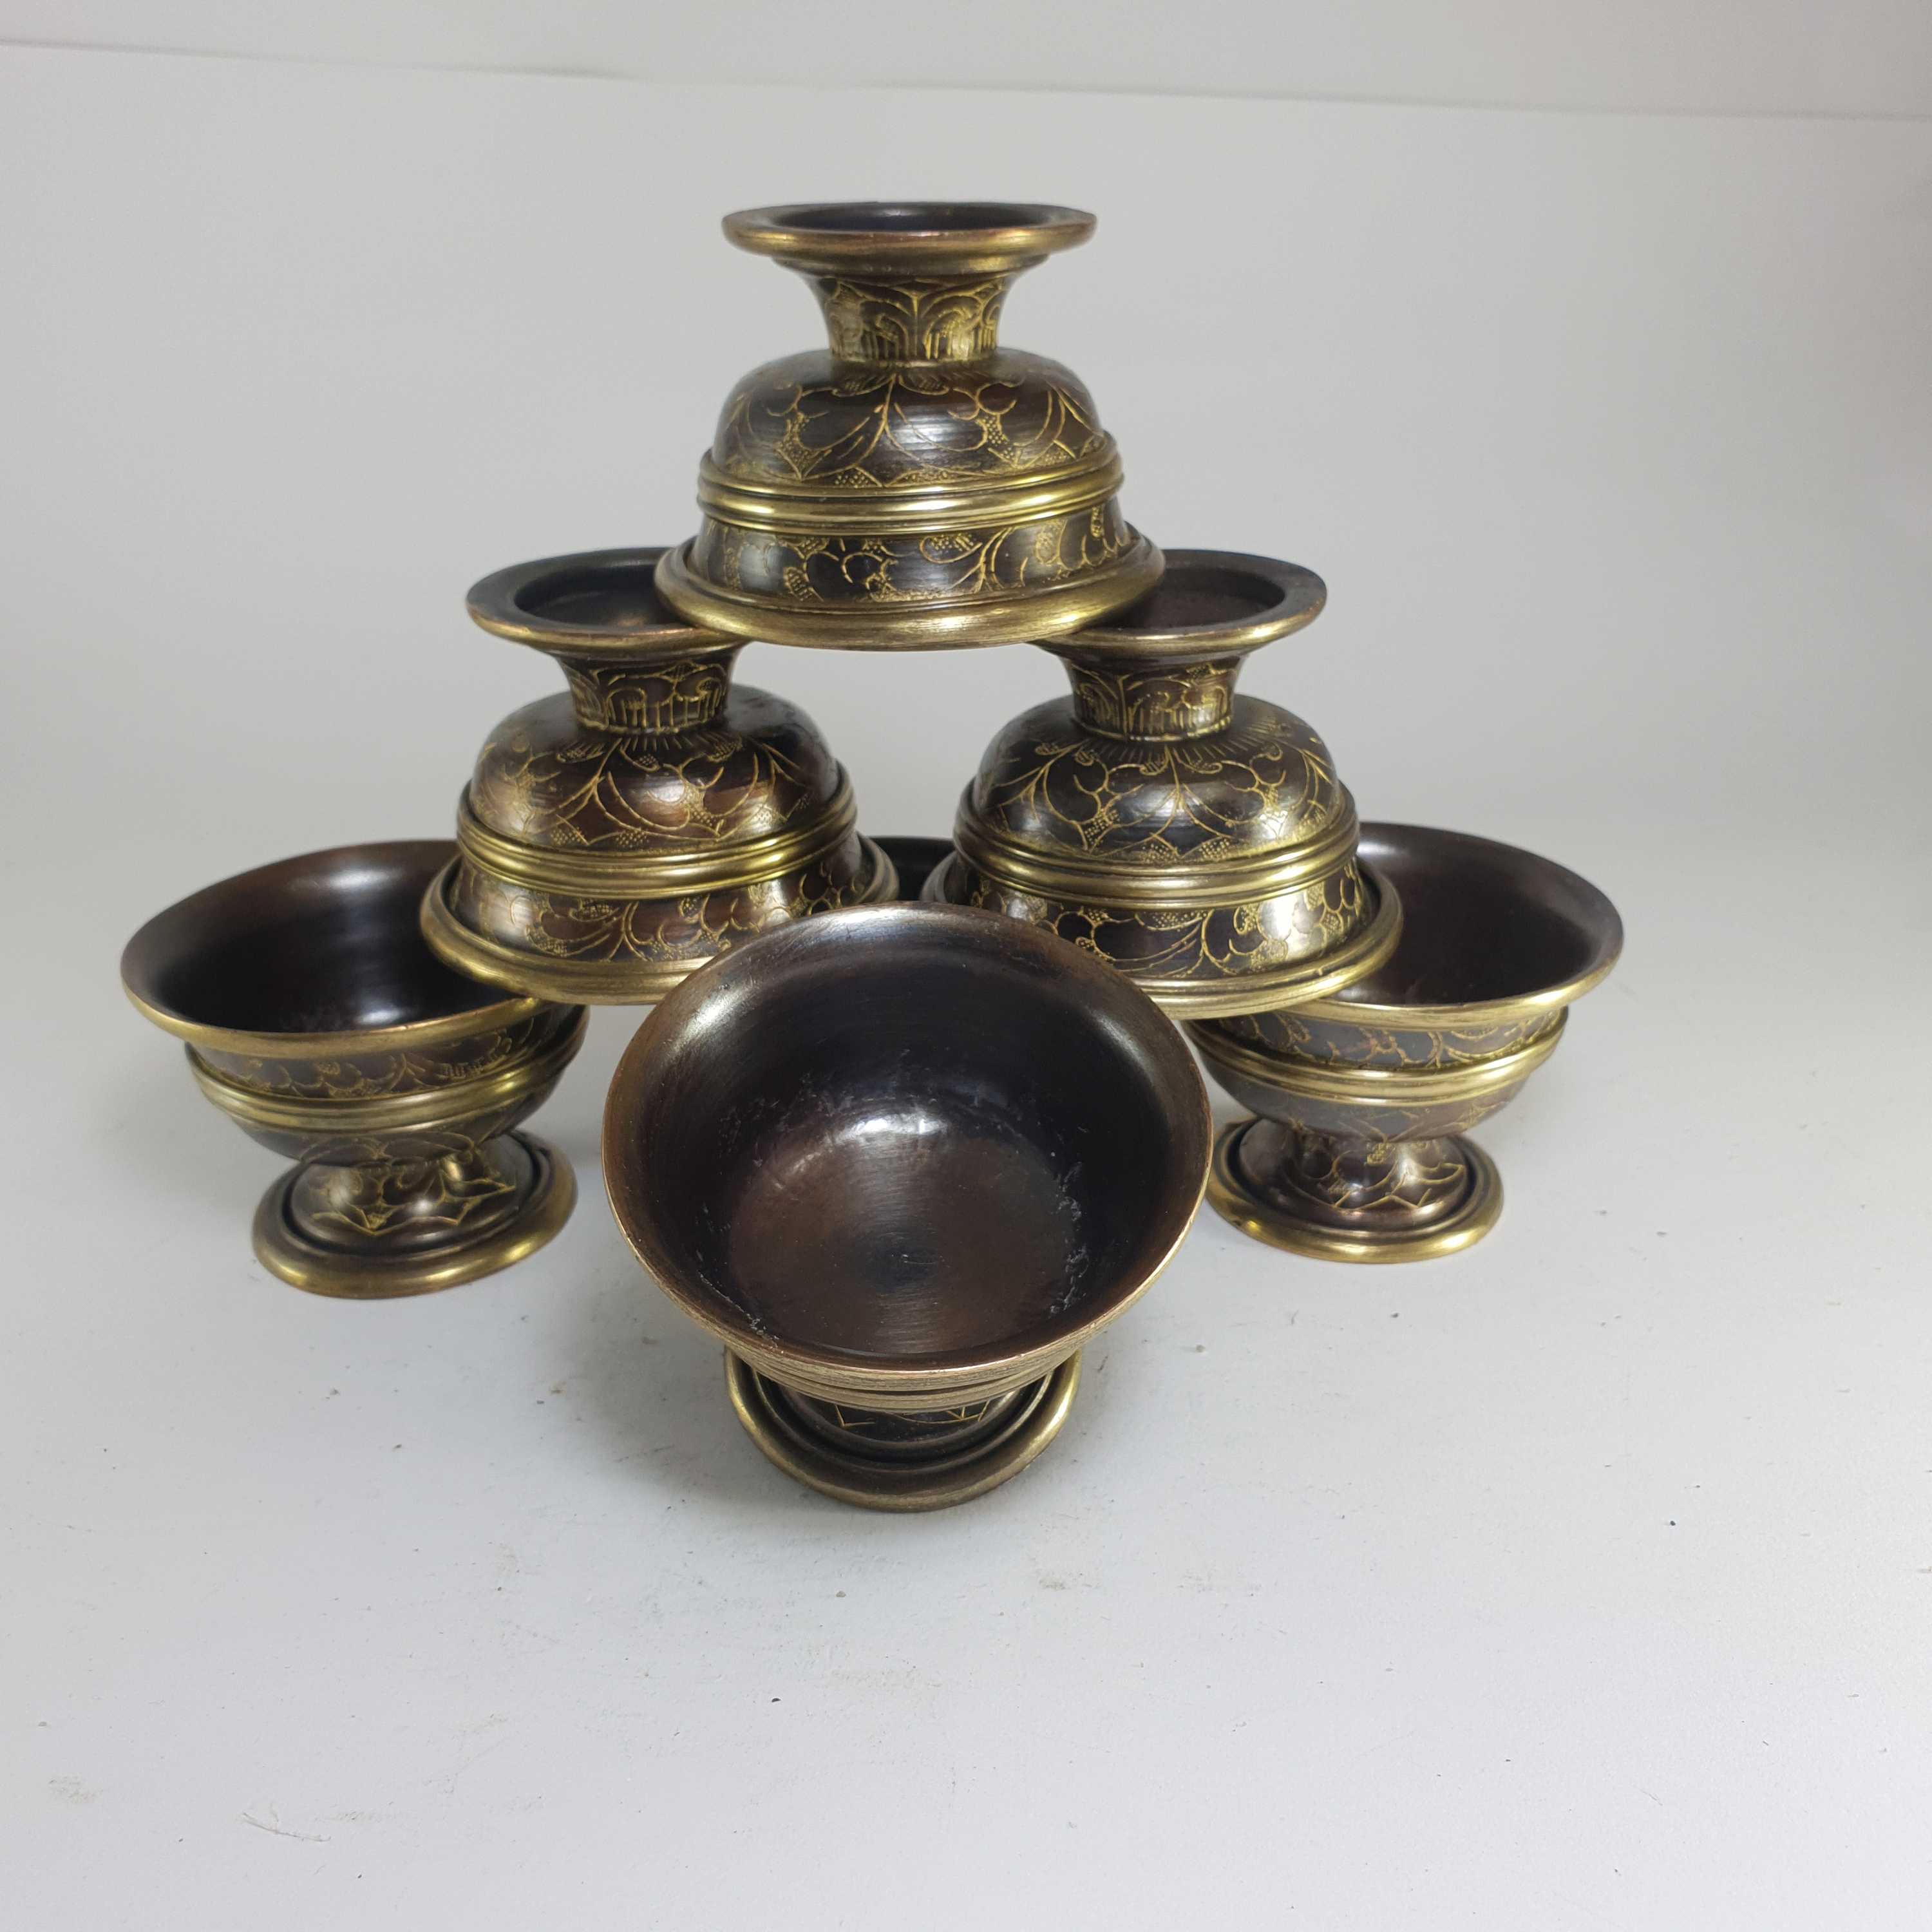 small Copper Offering Bowl With Stand And Hand Carving 7 Pcs Set, In Antique Finishing